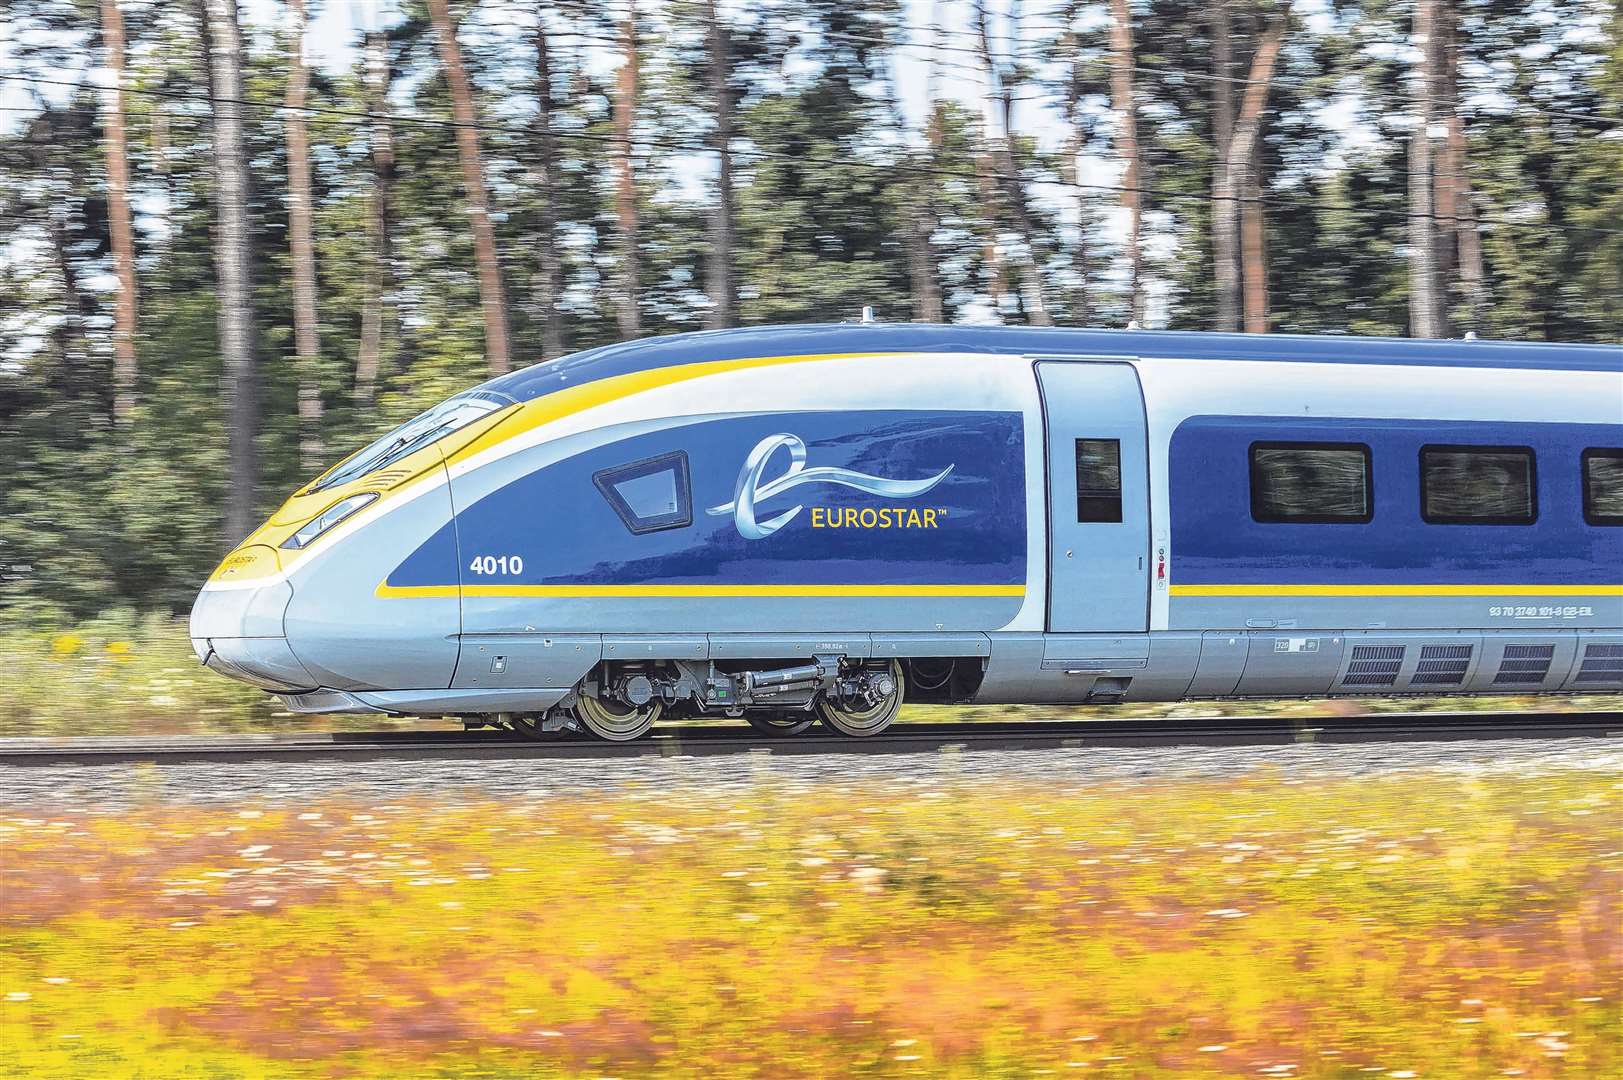 Eurostar services will be badly affected over the coming days